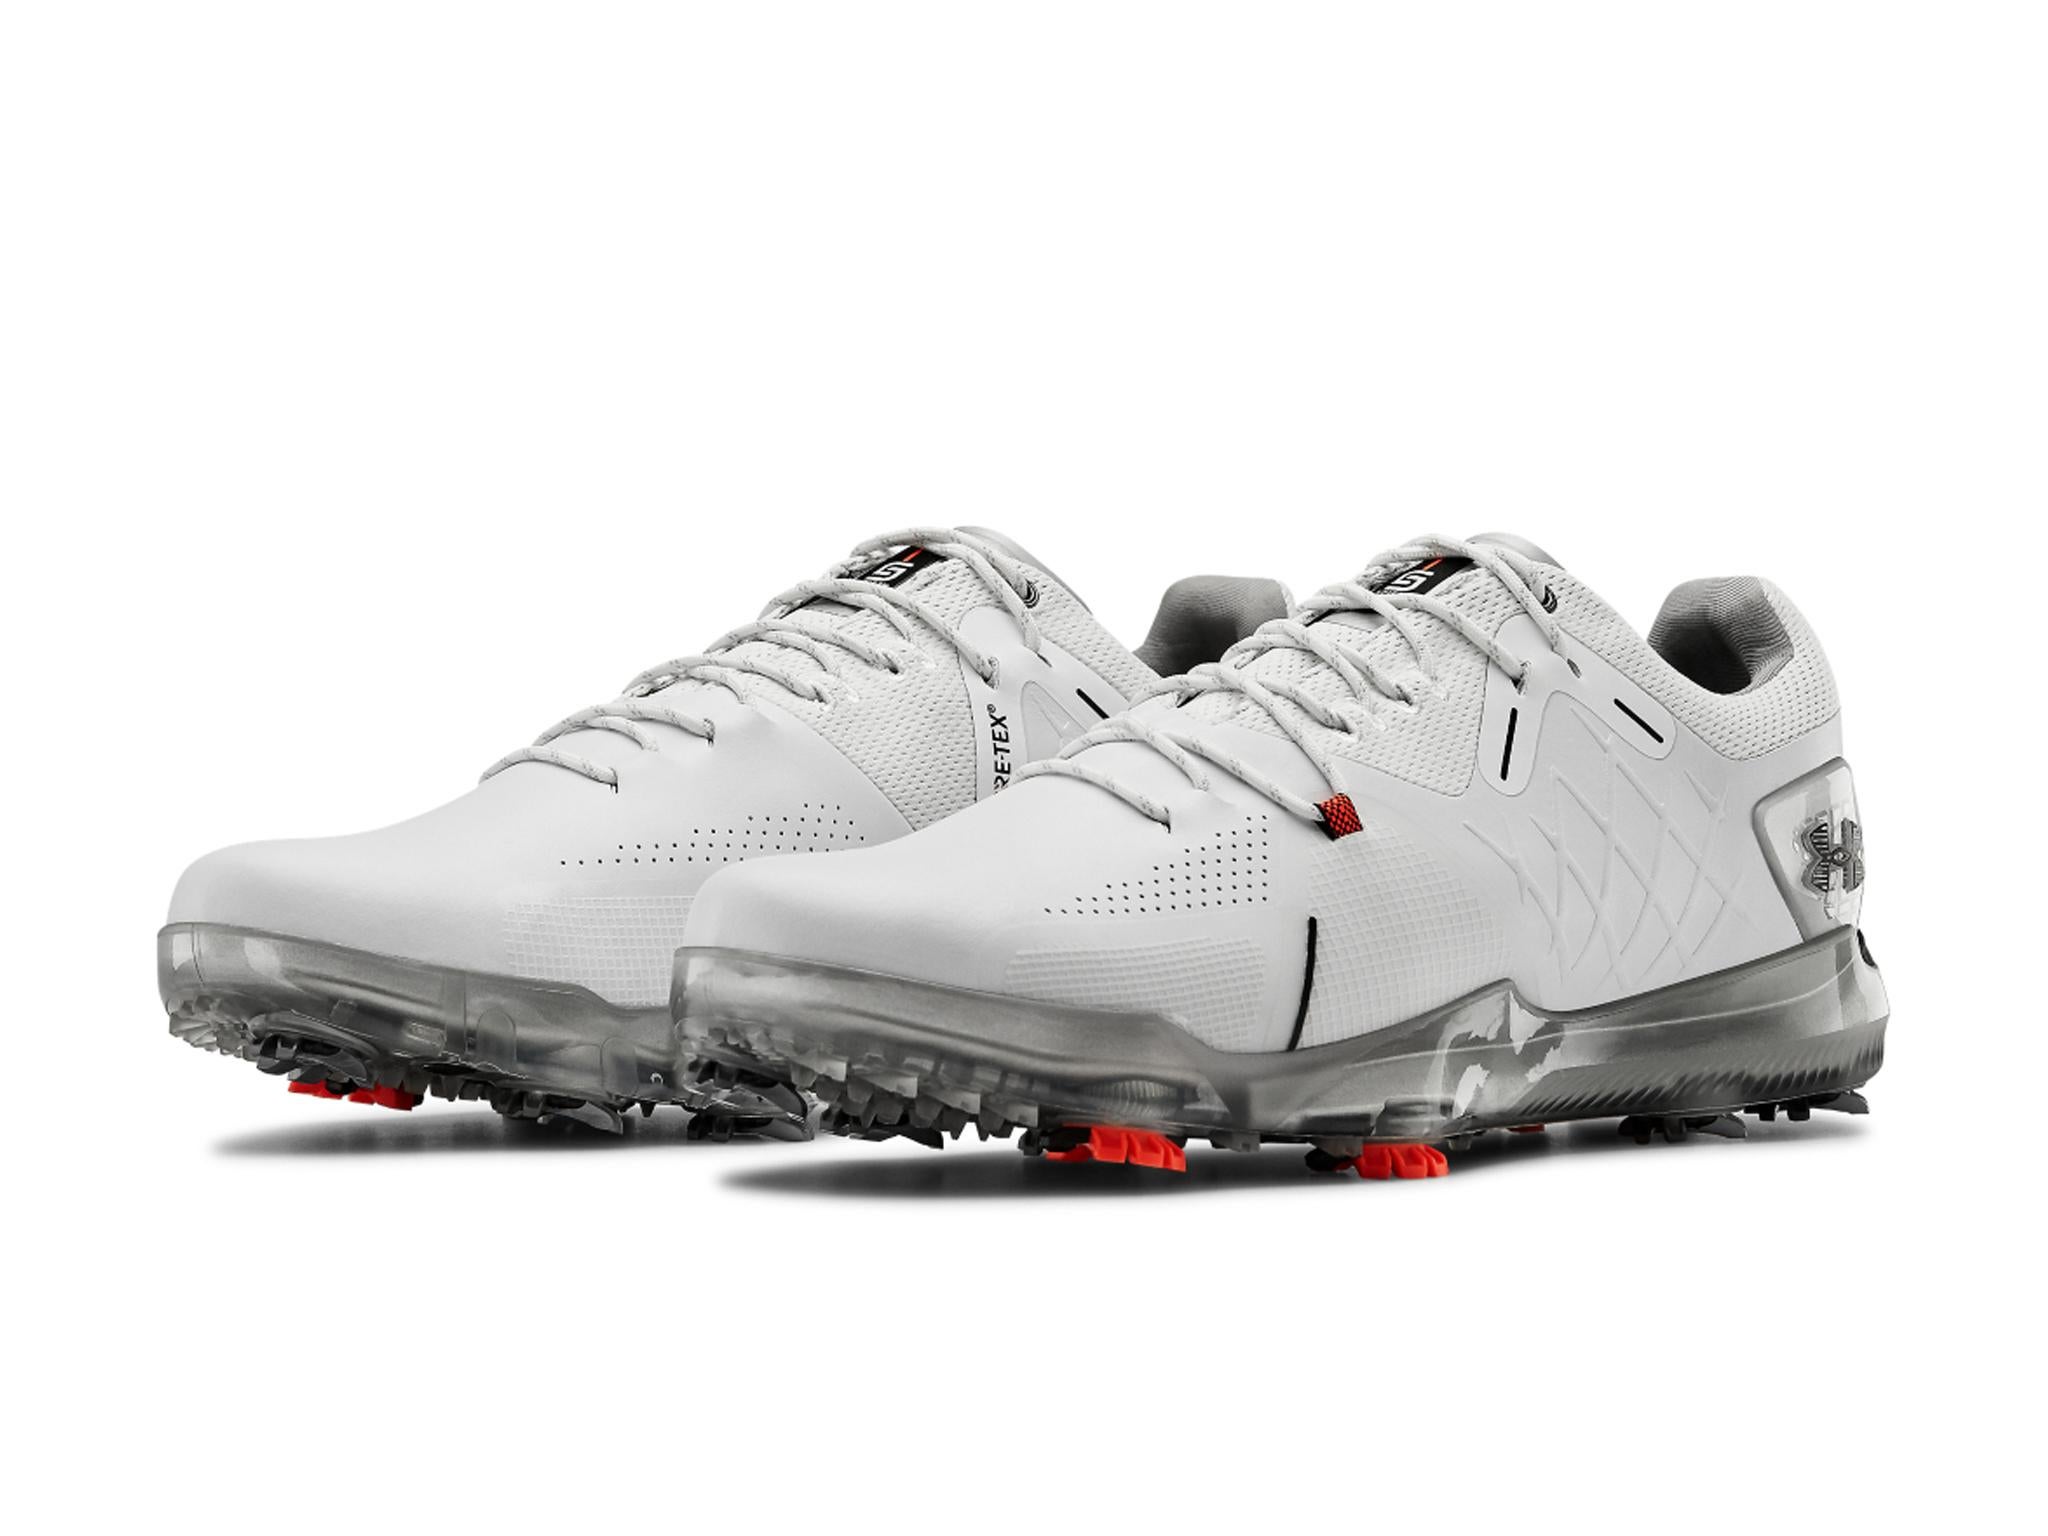 Best men's golf shoes 2020: Spiked 